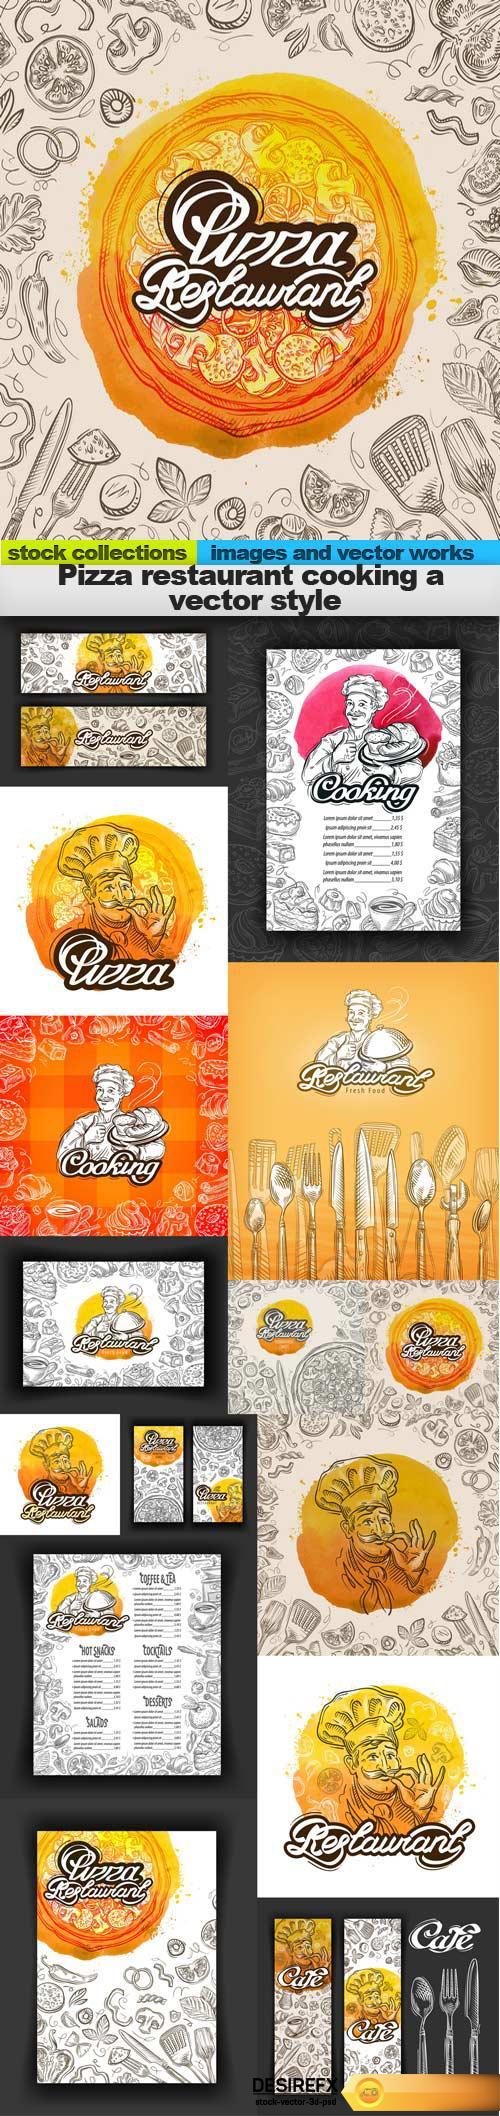 Pizza restaurant cooking a vector style, 15 x EPS